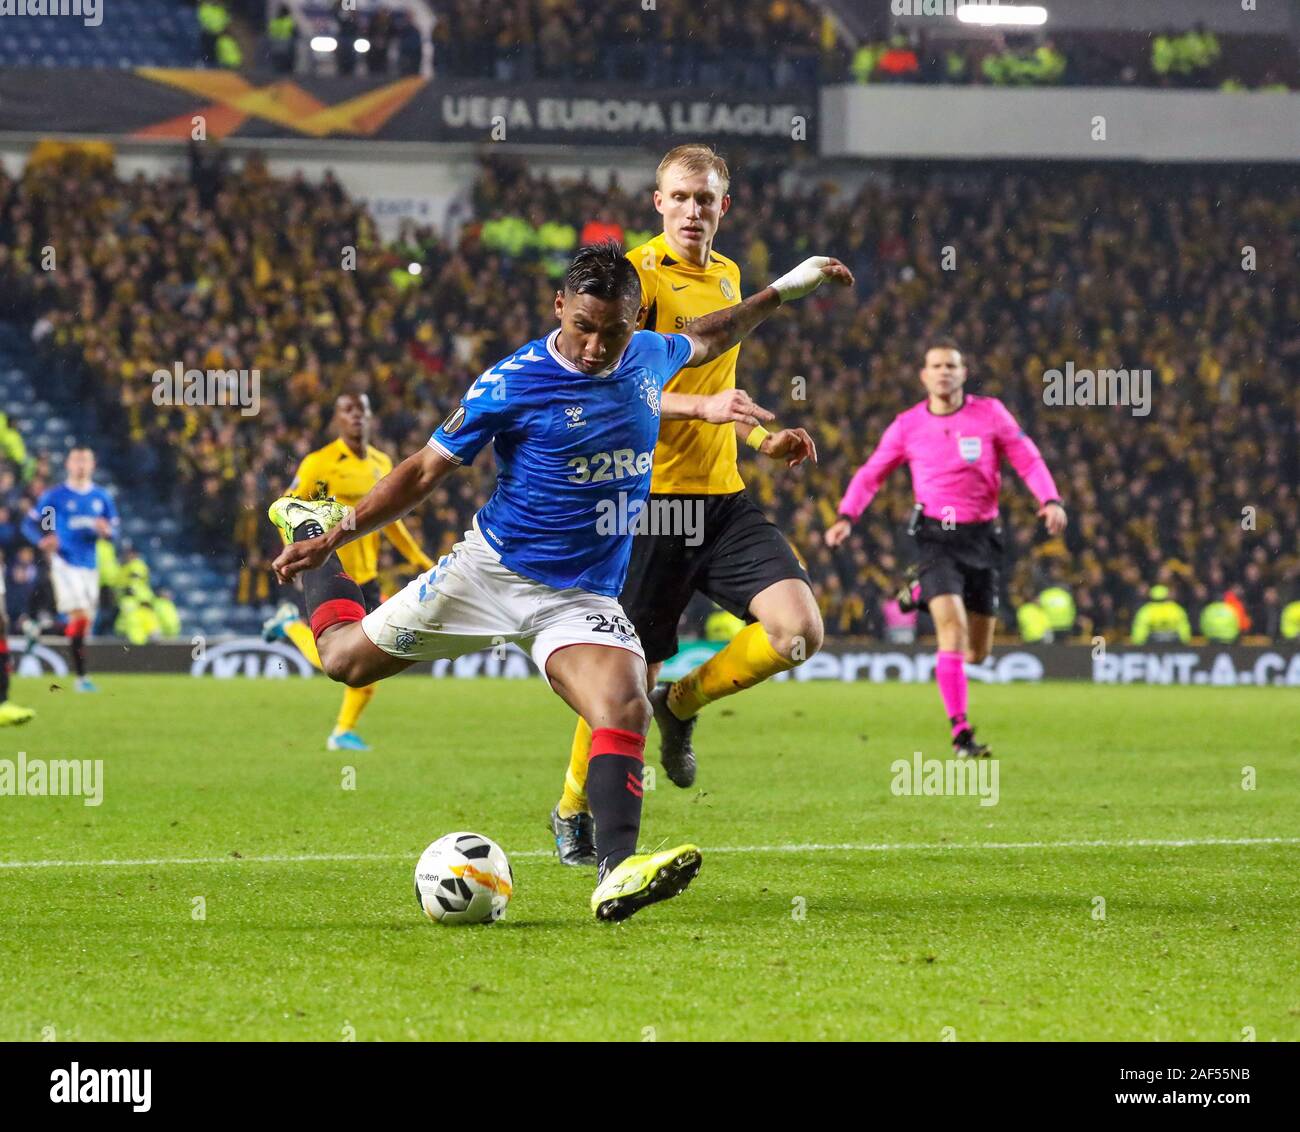 Glasgow, UK. 12 December 2019. Glasgow Rangers played the sixth and final Group G fixture in the UEFA Europa League at Ibrox, their home stadium against the Swiss team BSC Young Boys. The final score was a 1 -1 draw with the  Rangers goal scored by Alfredo Morelos and that was enough for  Rangers to progress to the next round Credit: Findlay / Alamy News Stock Photo